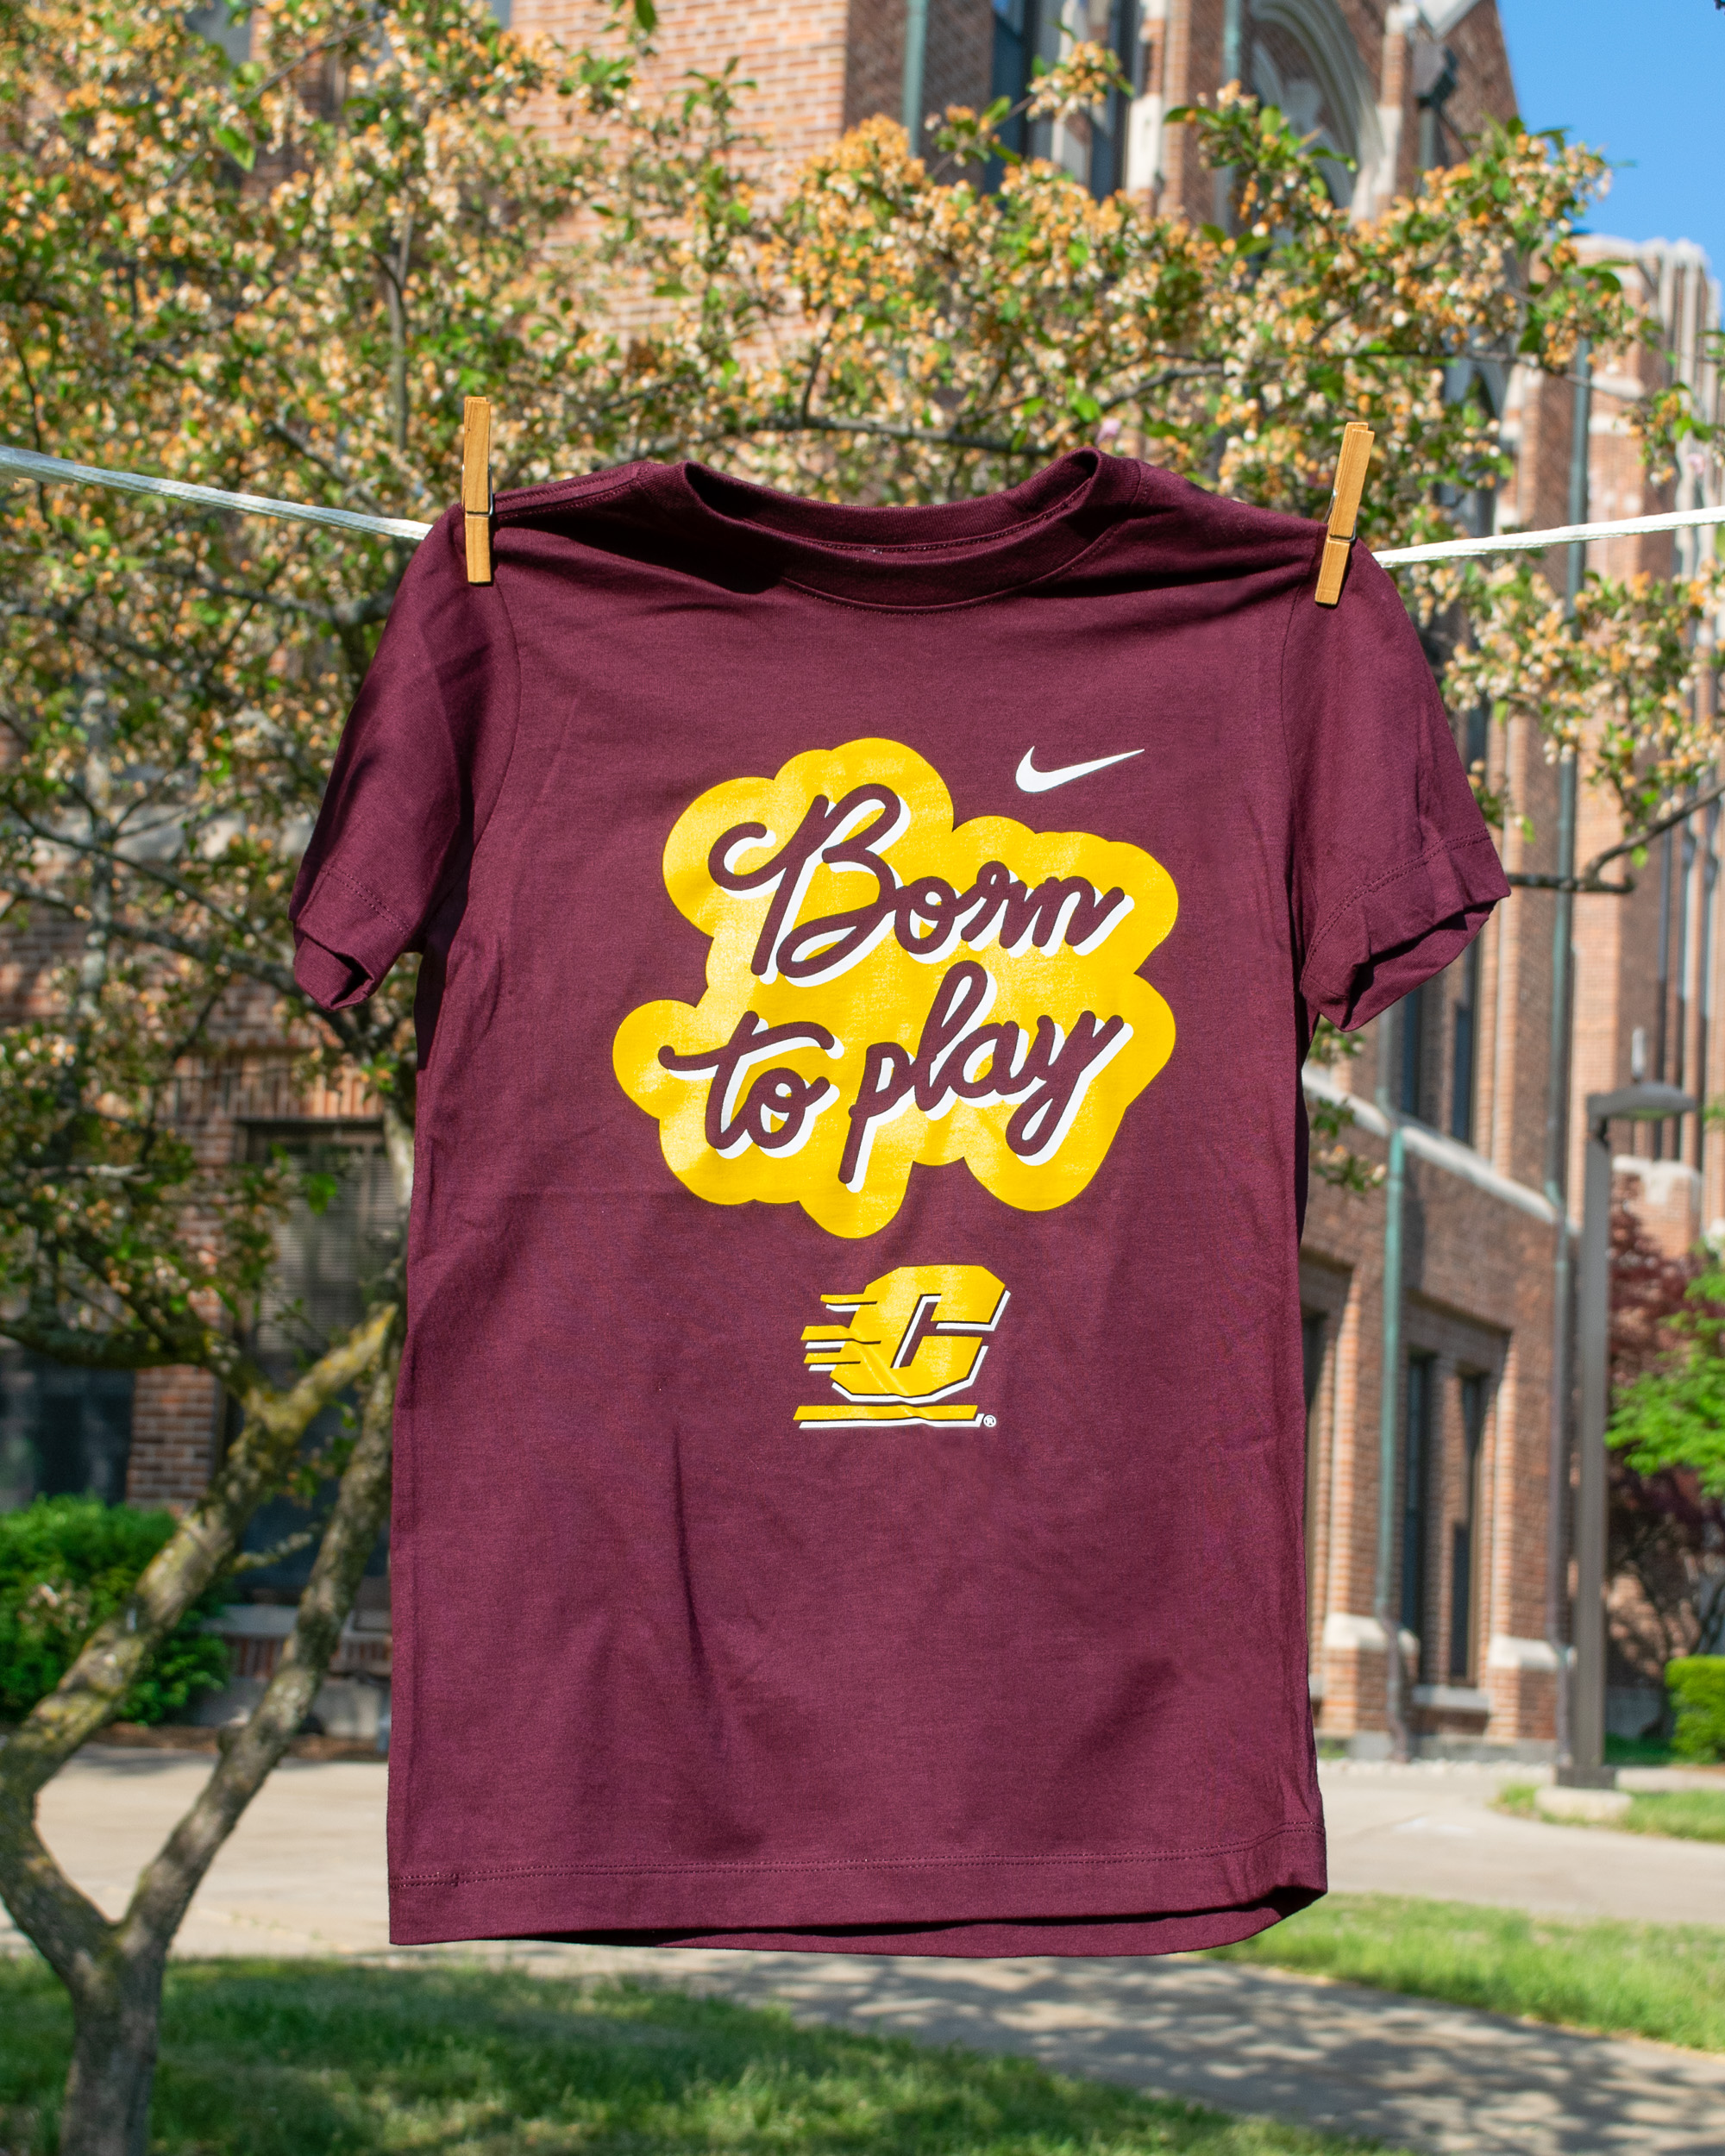 Action C Born To Play Maroon Youth T-Shirt